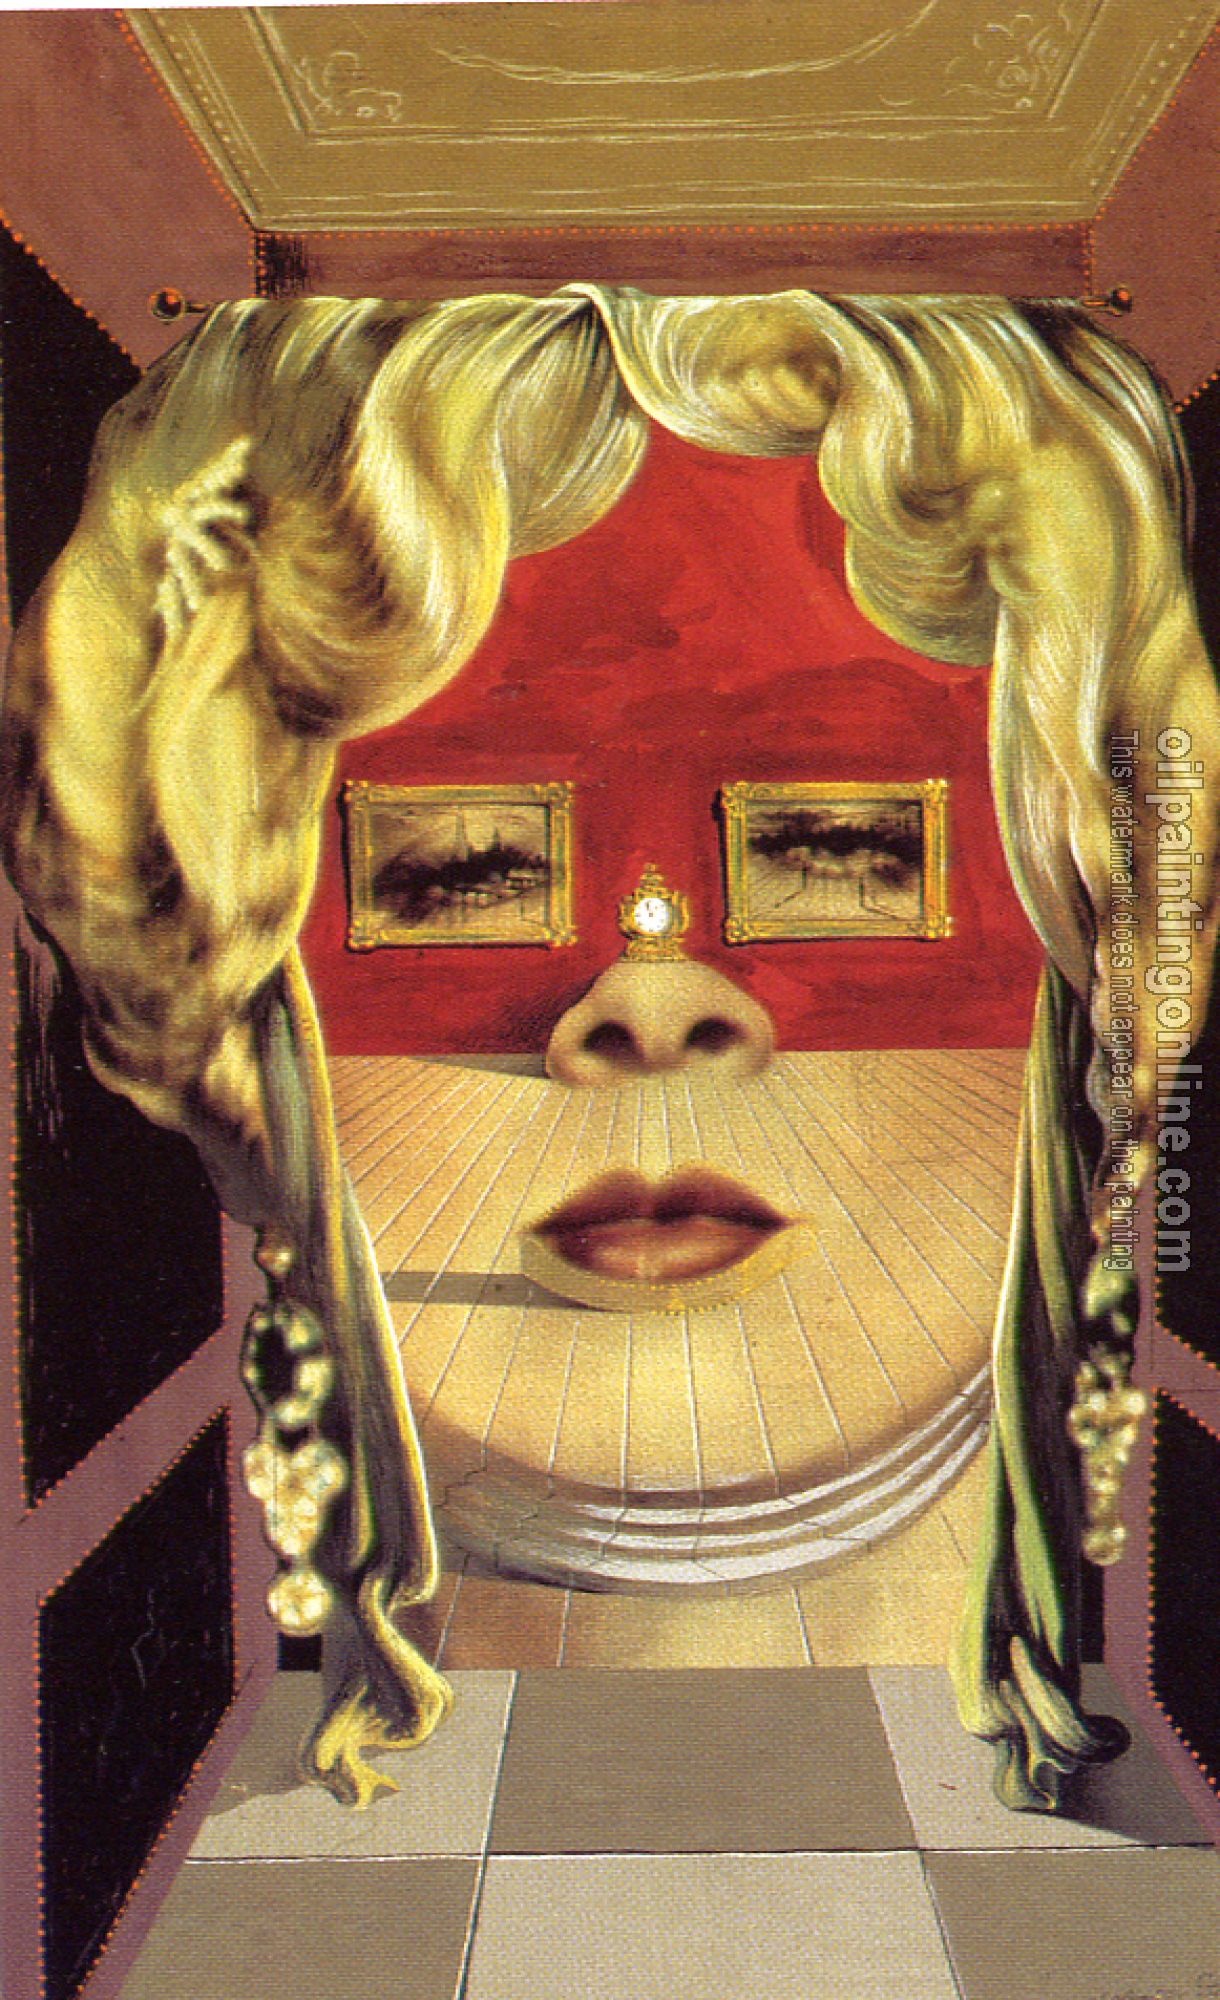 Dali, Salvador - Mae West's Face which May Be Used as a Surrealist Apartment